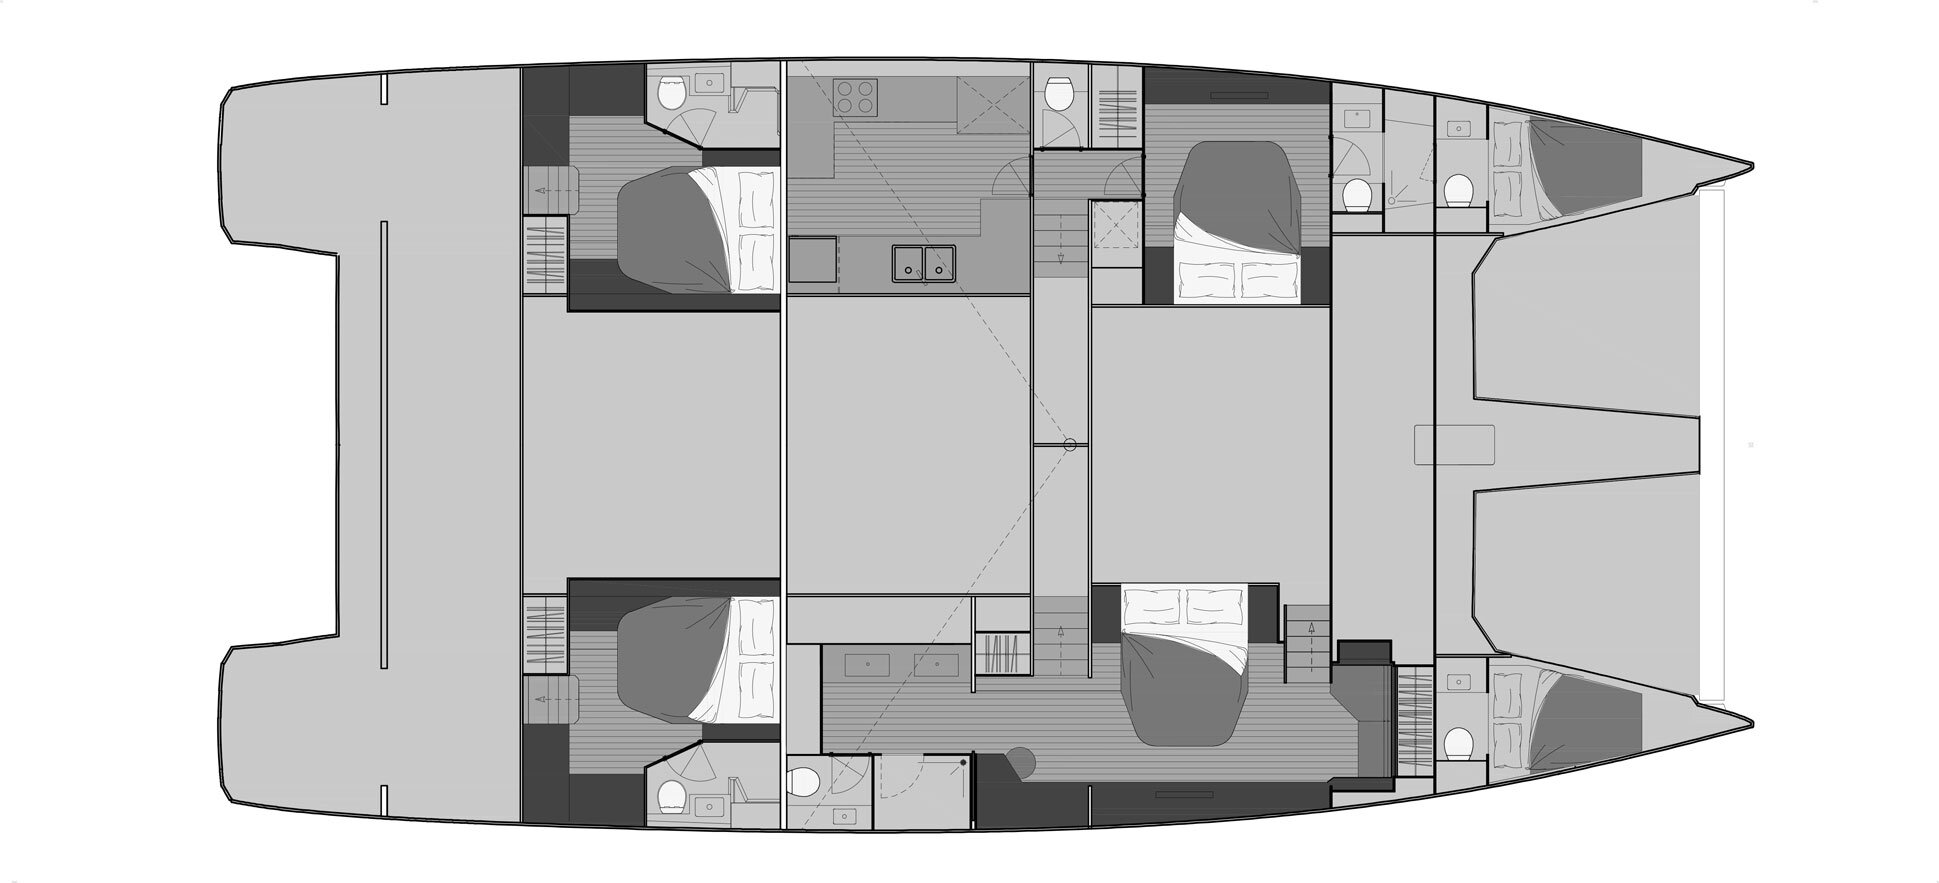 Power67_Layout_Lounge-Maestro-version---Double-bed-portside-aft-cabin.jpg